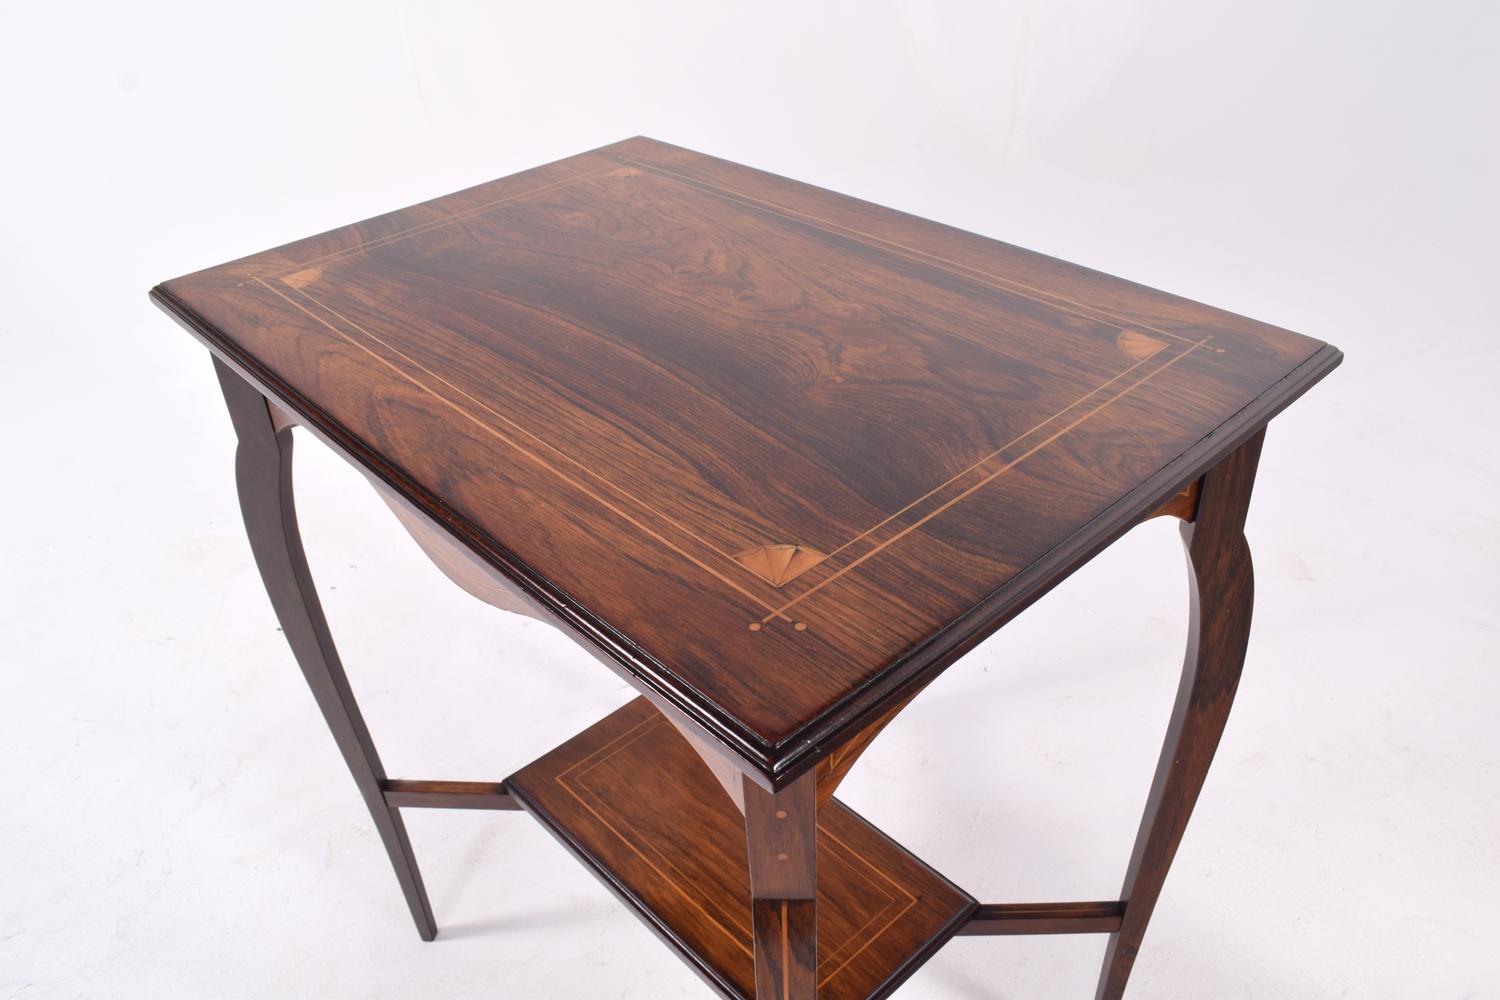 English Edwardian Decorative Inlaid Rosewood Side Table, 1910 For Sale 4